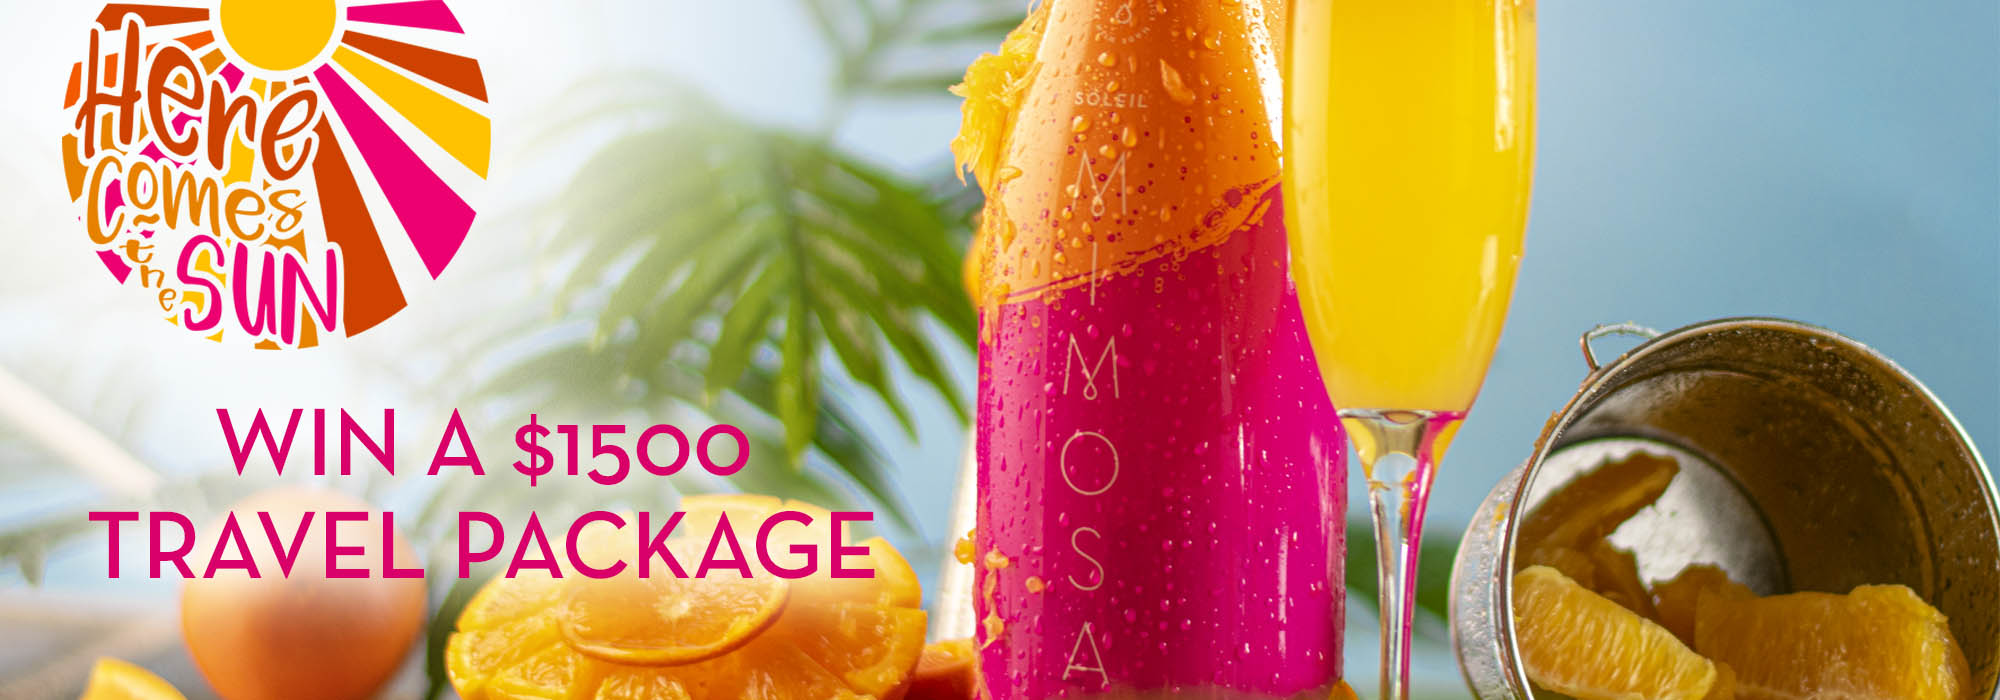 soleil mimosa here comes the sun sweepstakes